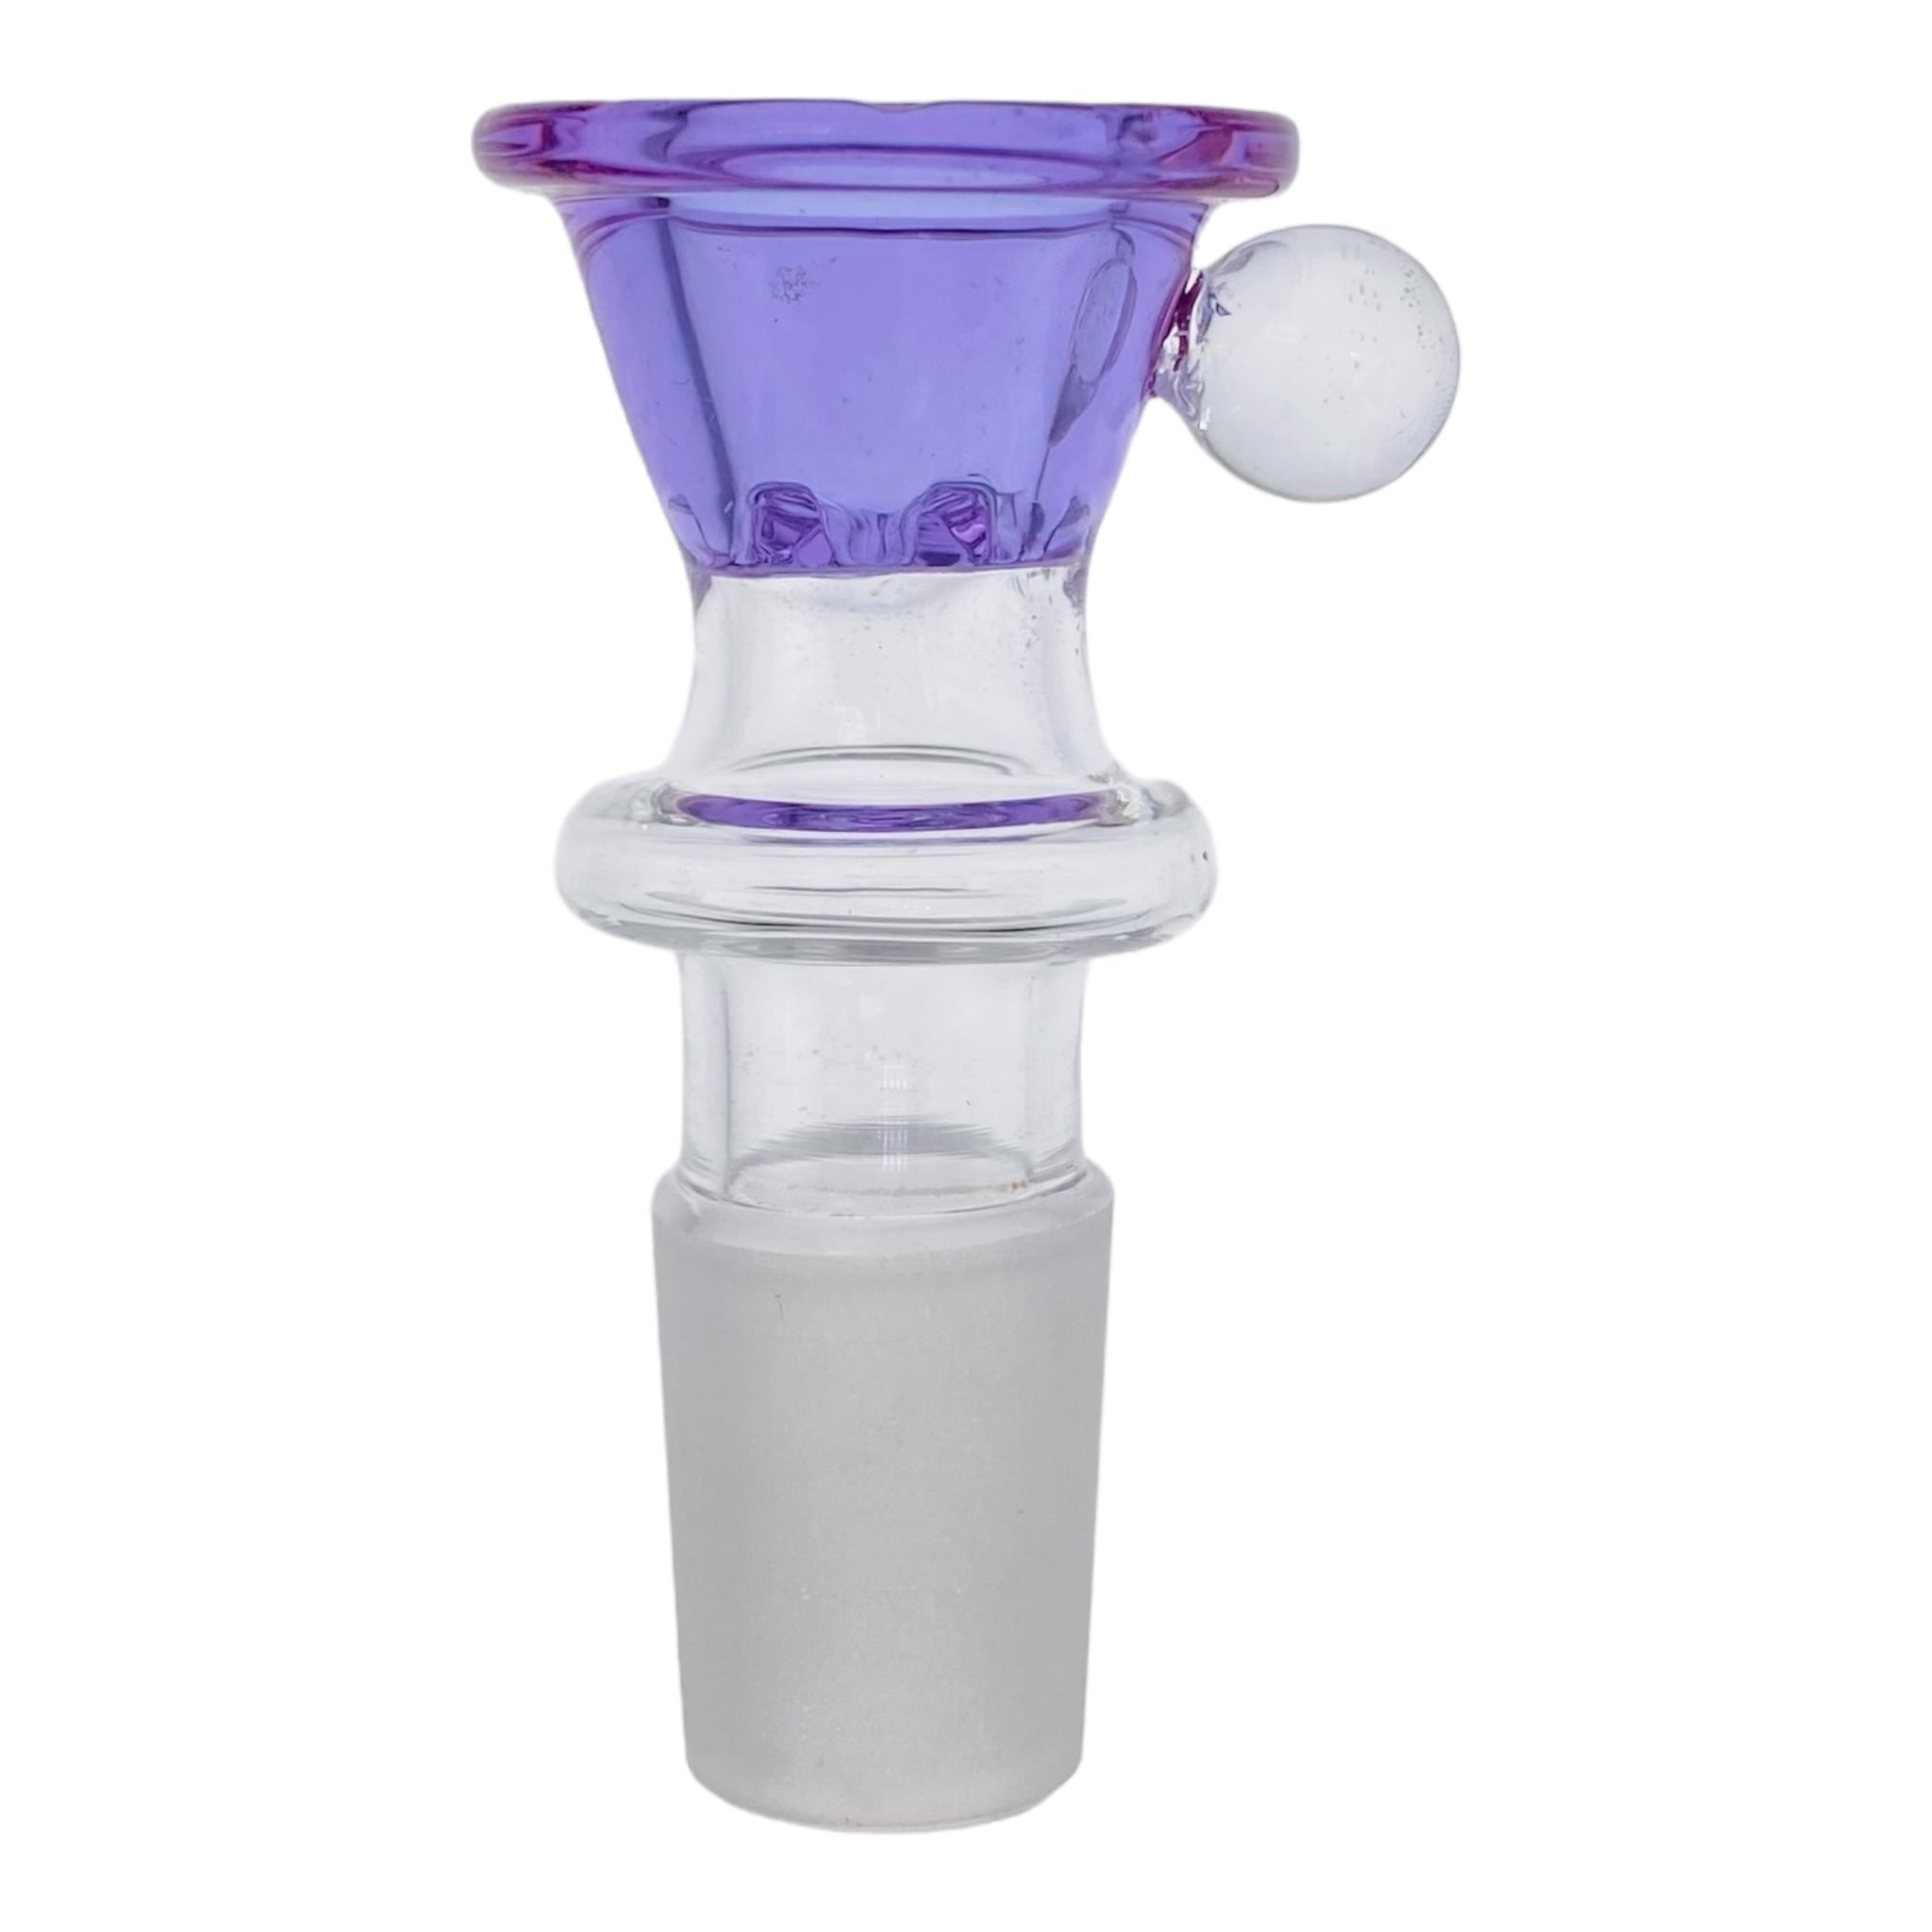 18mm Flower Bowl - Large Martini Funnel Bong Bowl Piece With Built In Screen - Purple